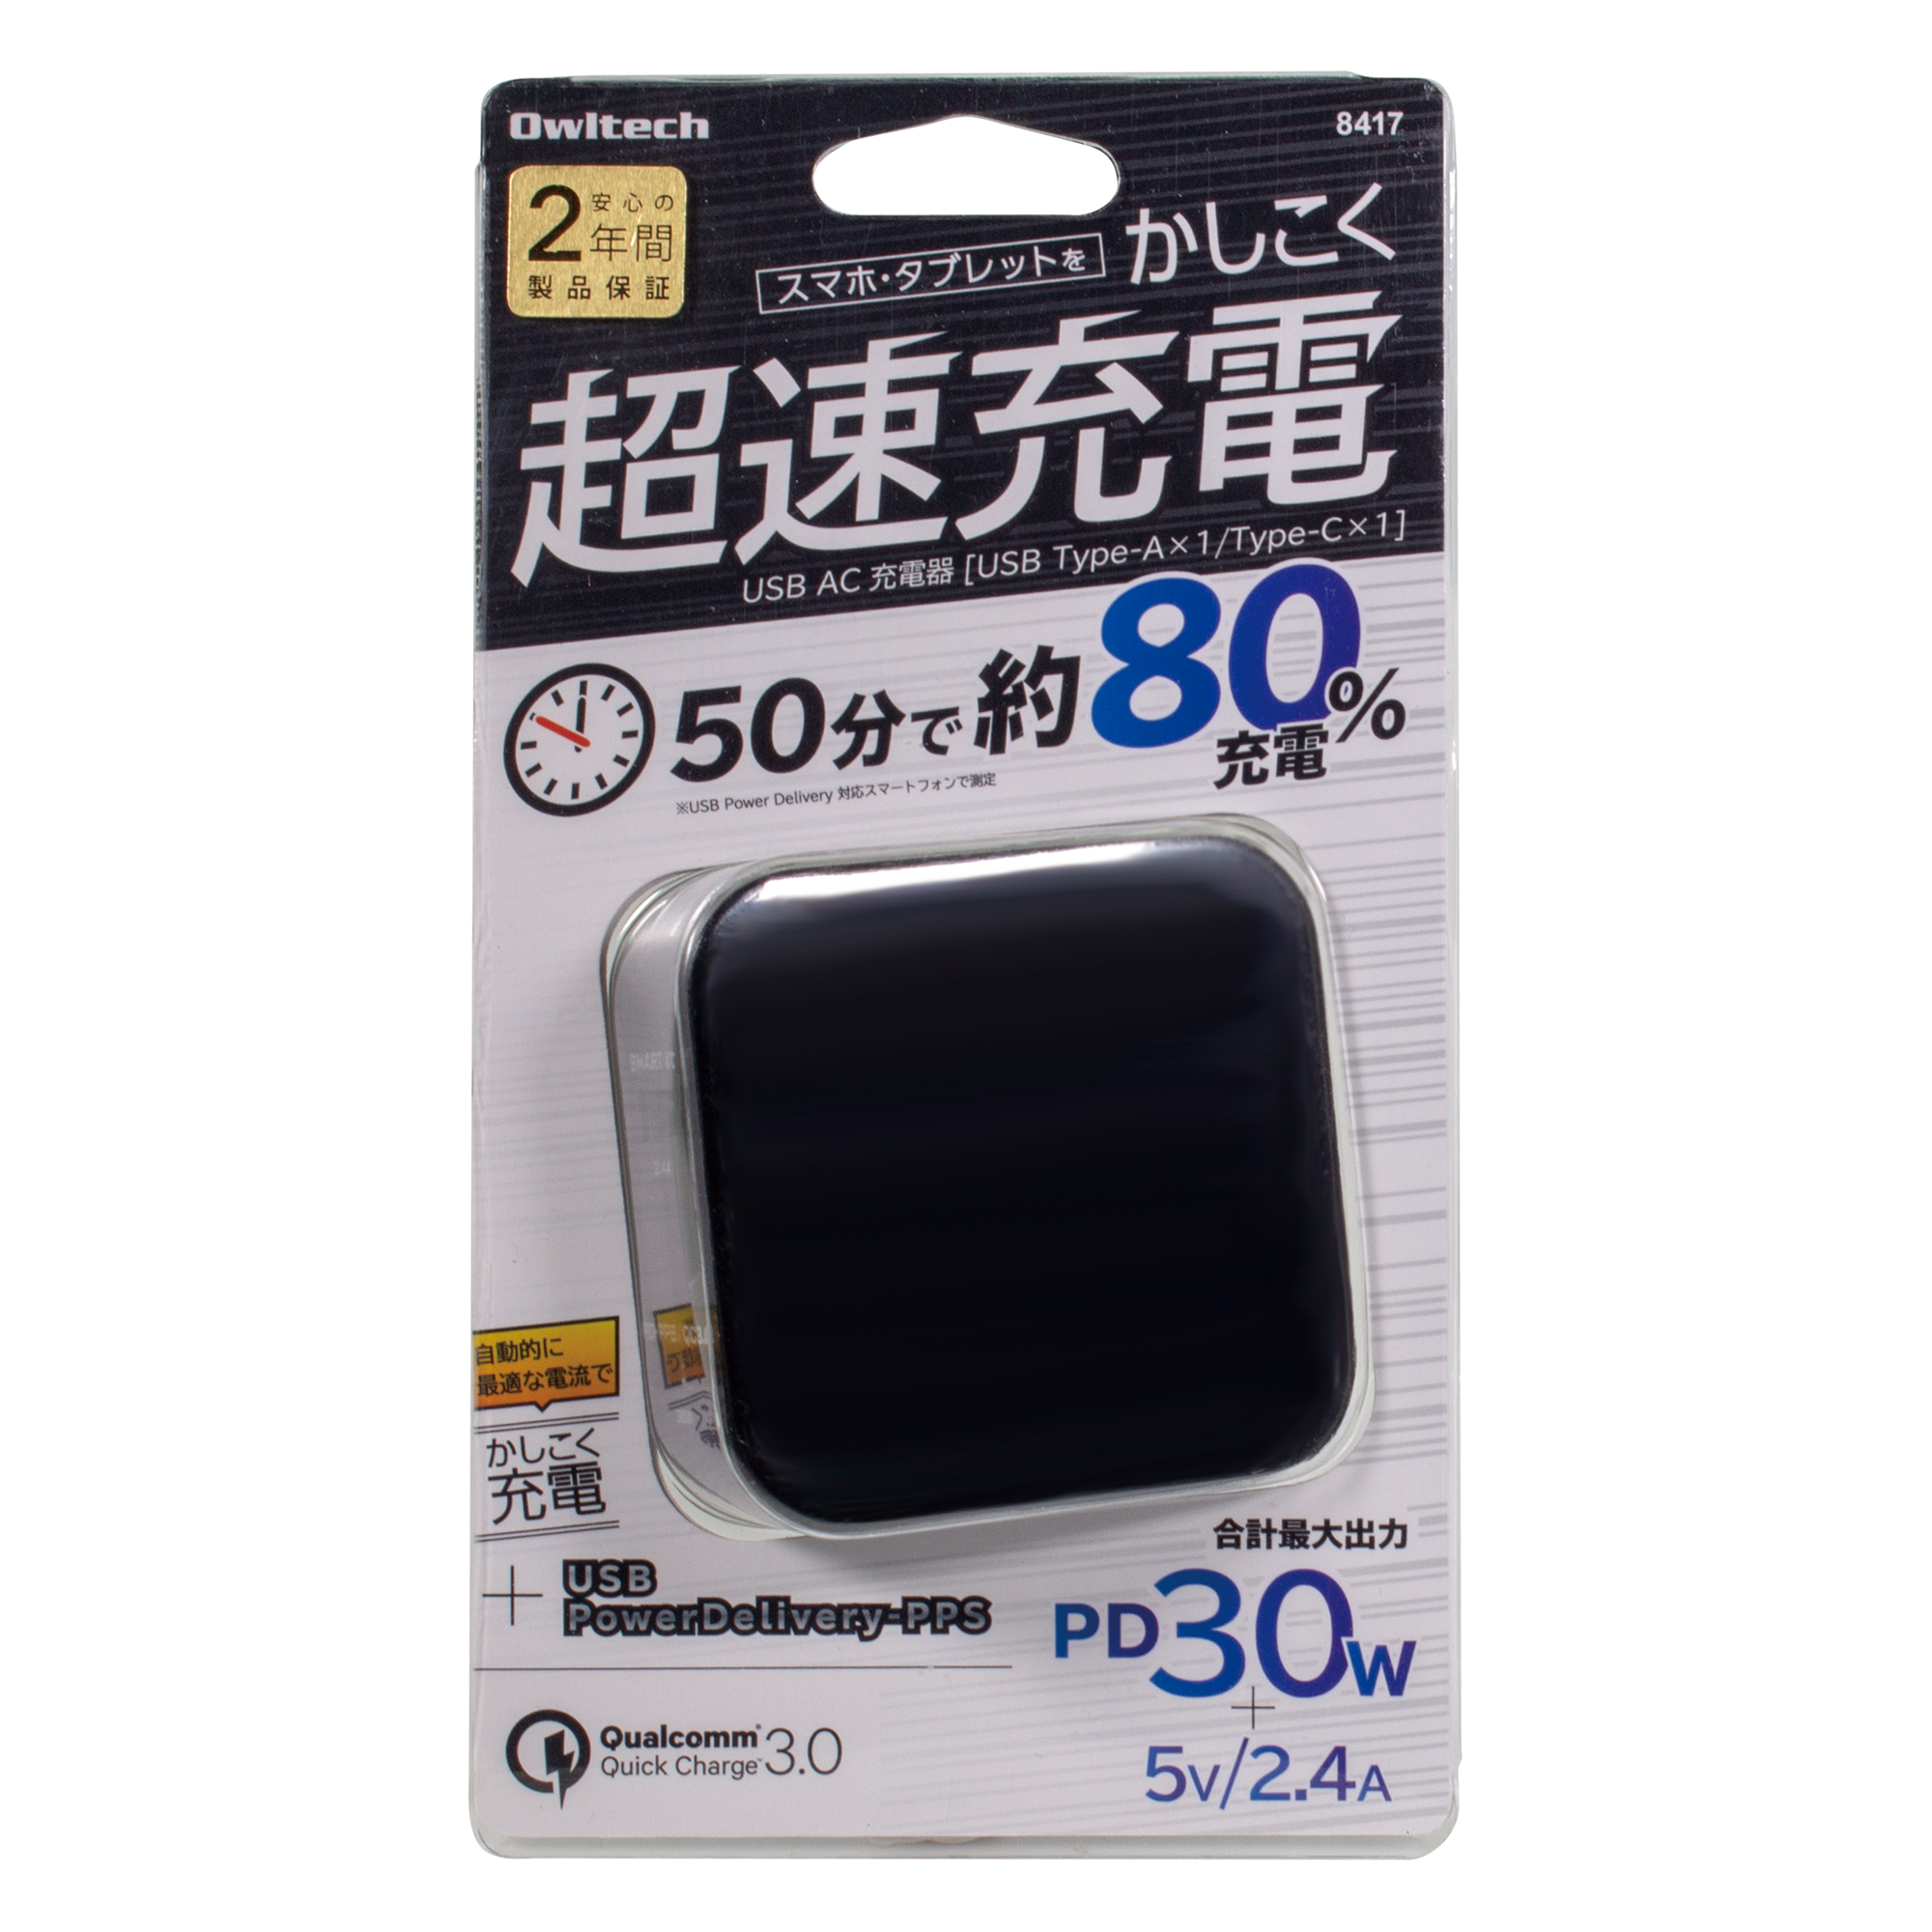 Power Delivery-PPSと Quick Charge 3.0対応USB Type-Cポートと SmartIC対応 USB Type-Aポート搭載  AC充電器 OWL-ACPDU1S | 株式会社オウルテック